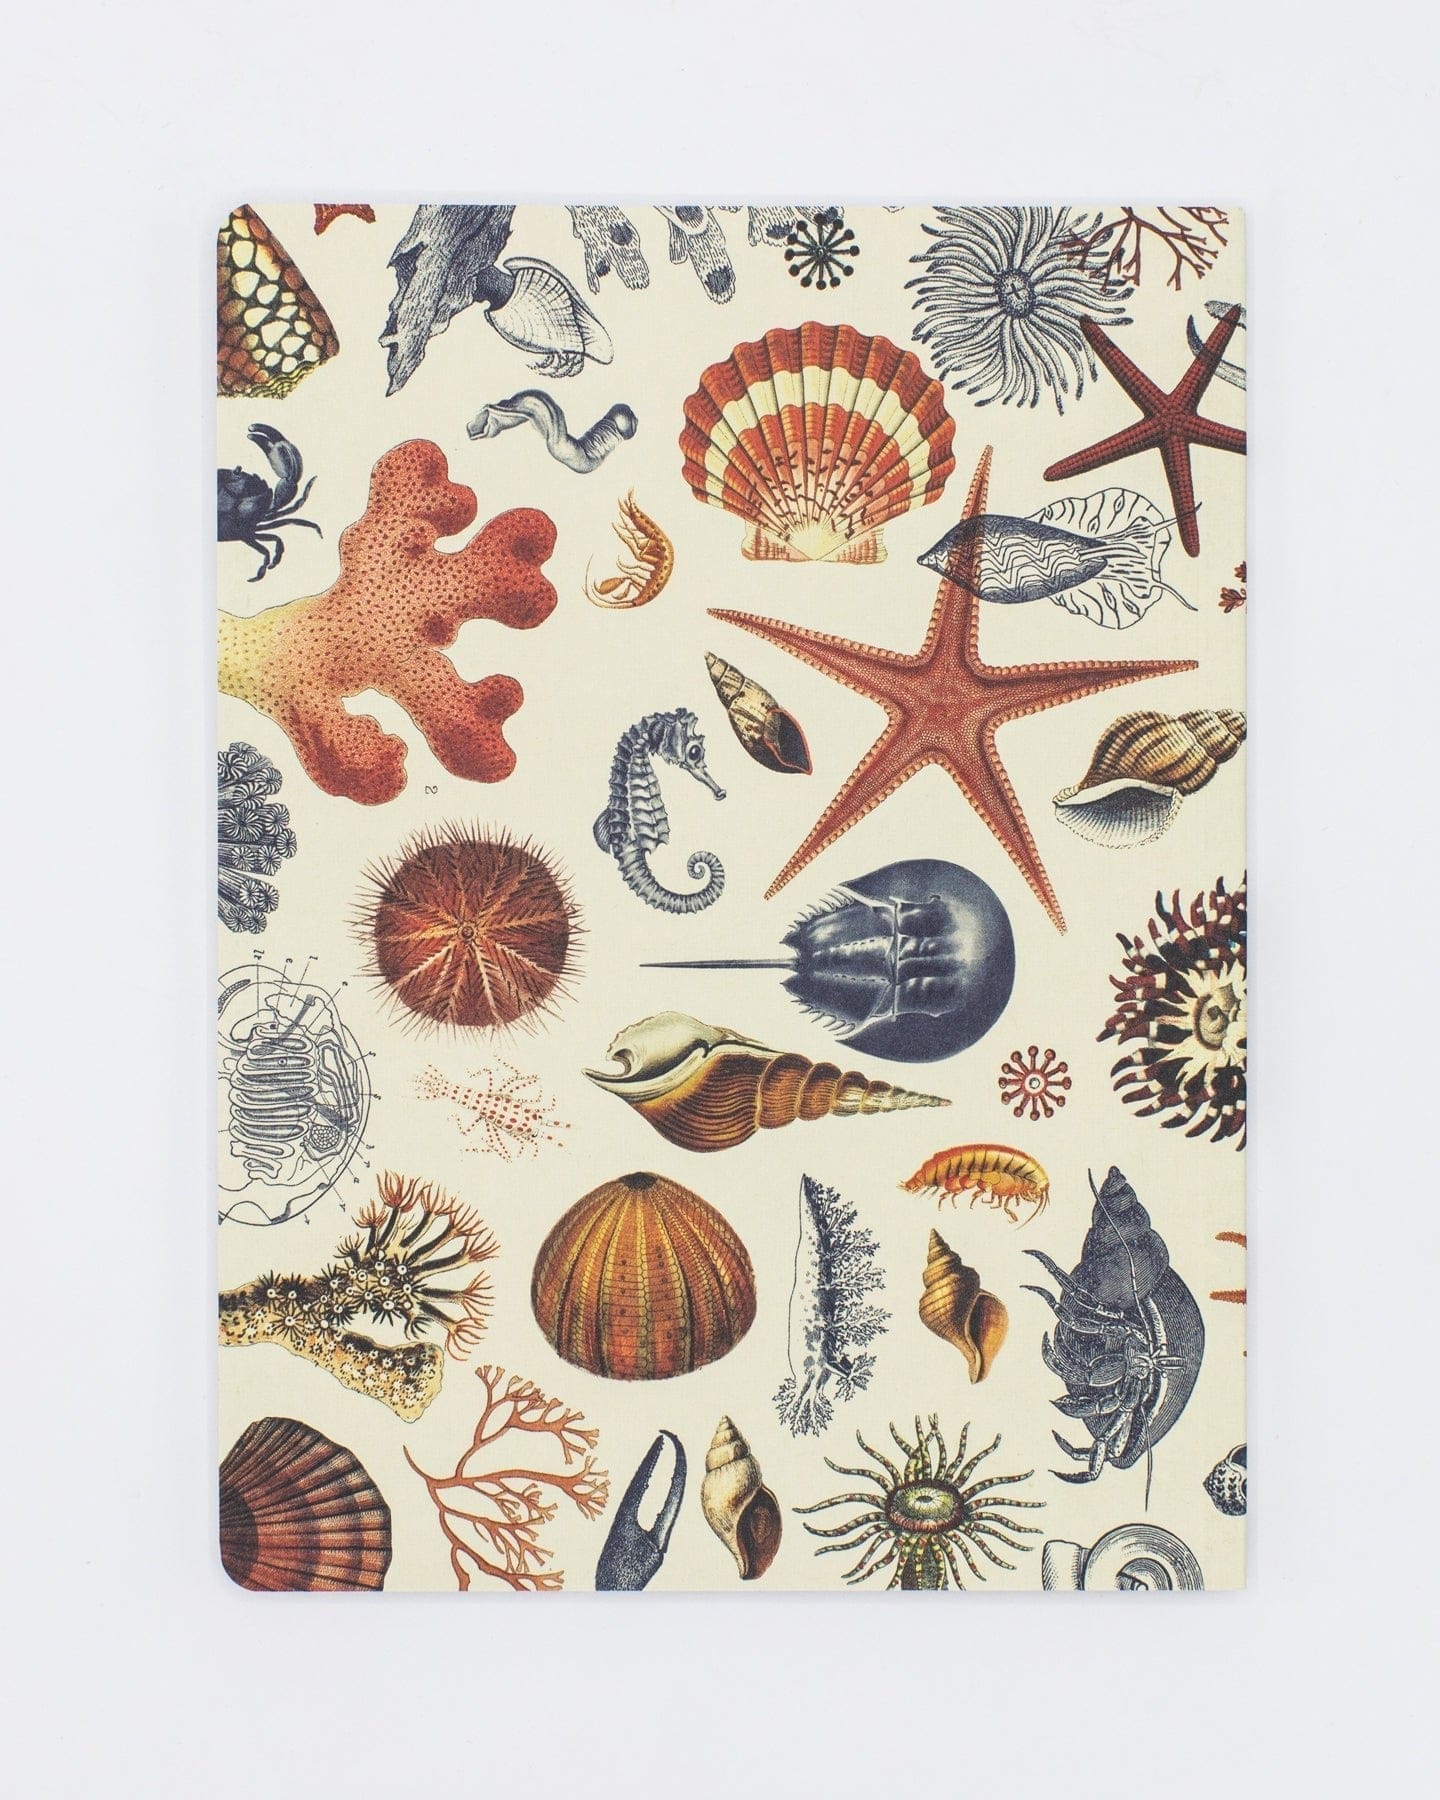 Shallow Seas Plate 2 Softcover- Lined Cognitive Surplus